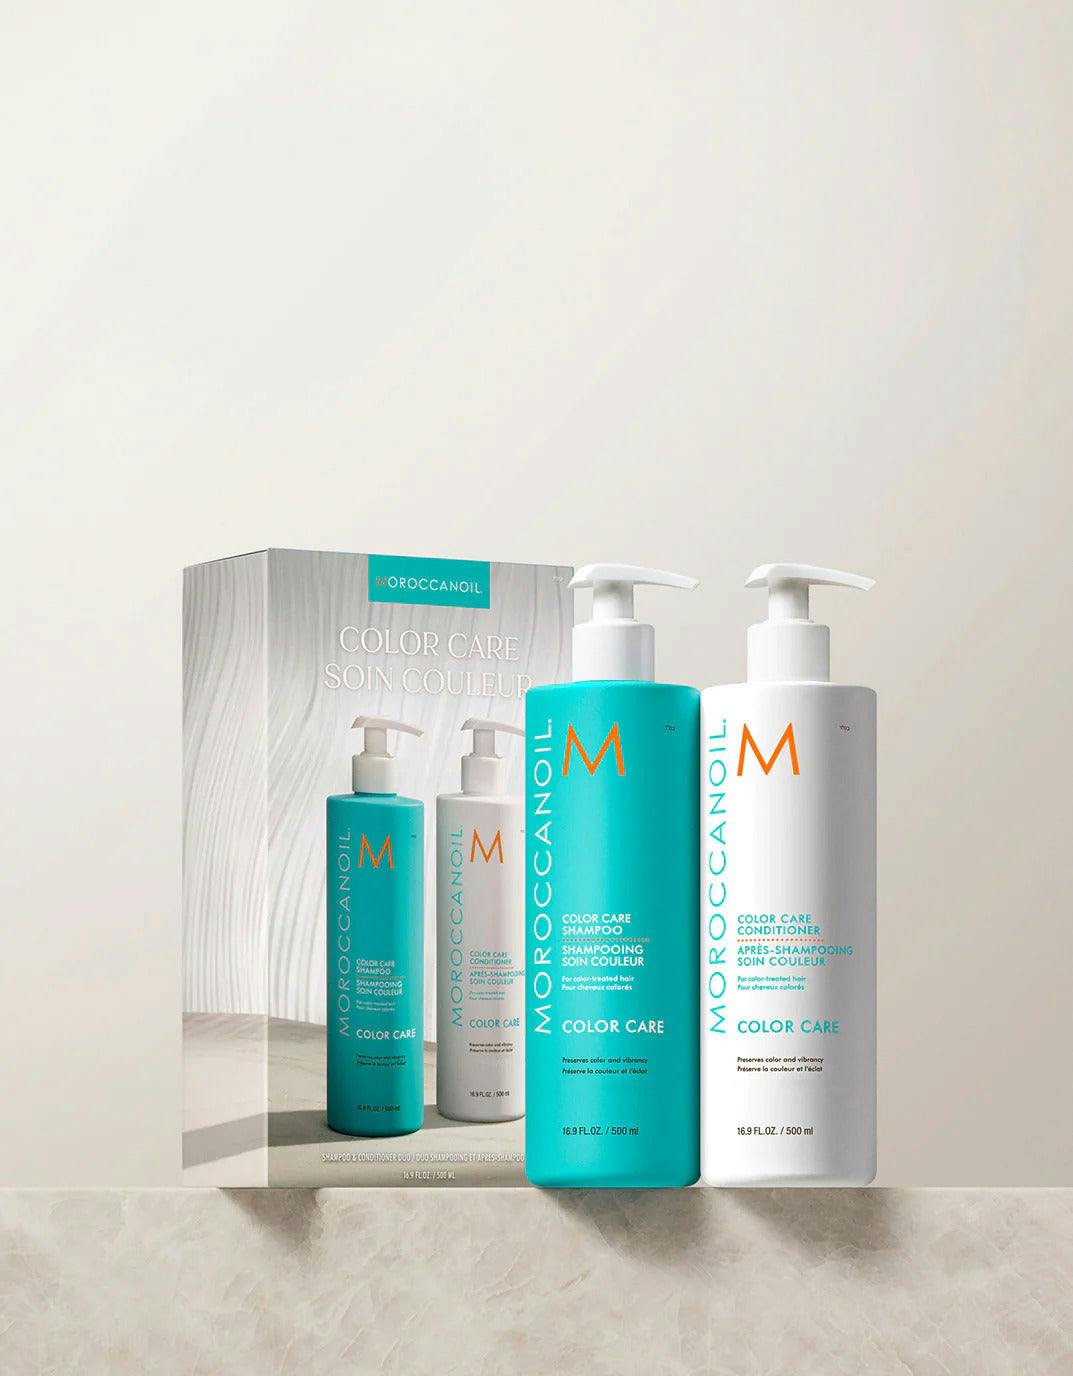 Moroccanoil Color Care Shampoo and Conditioner 500ml Duo Pack